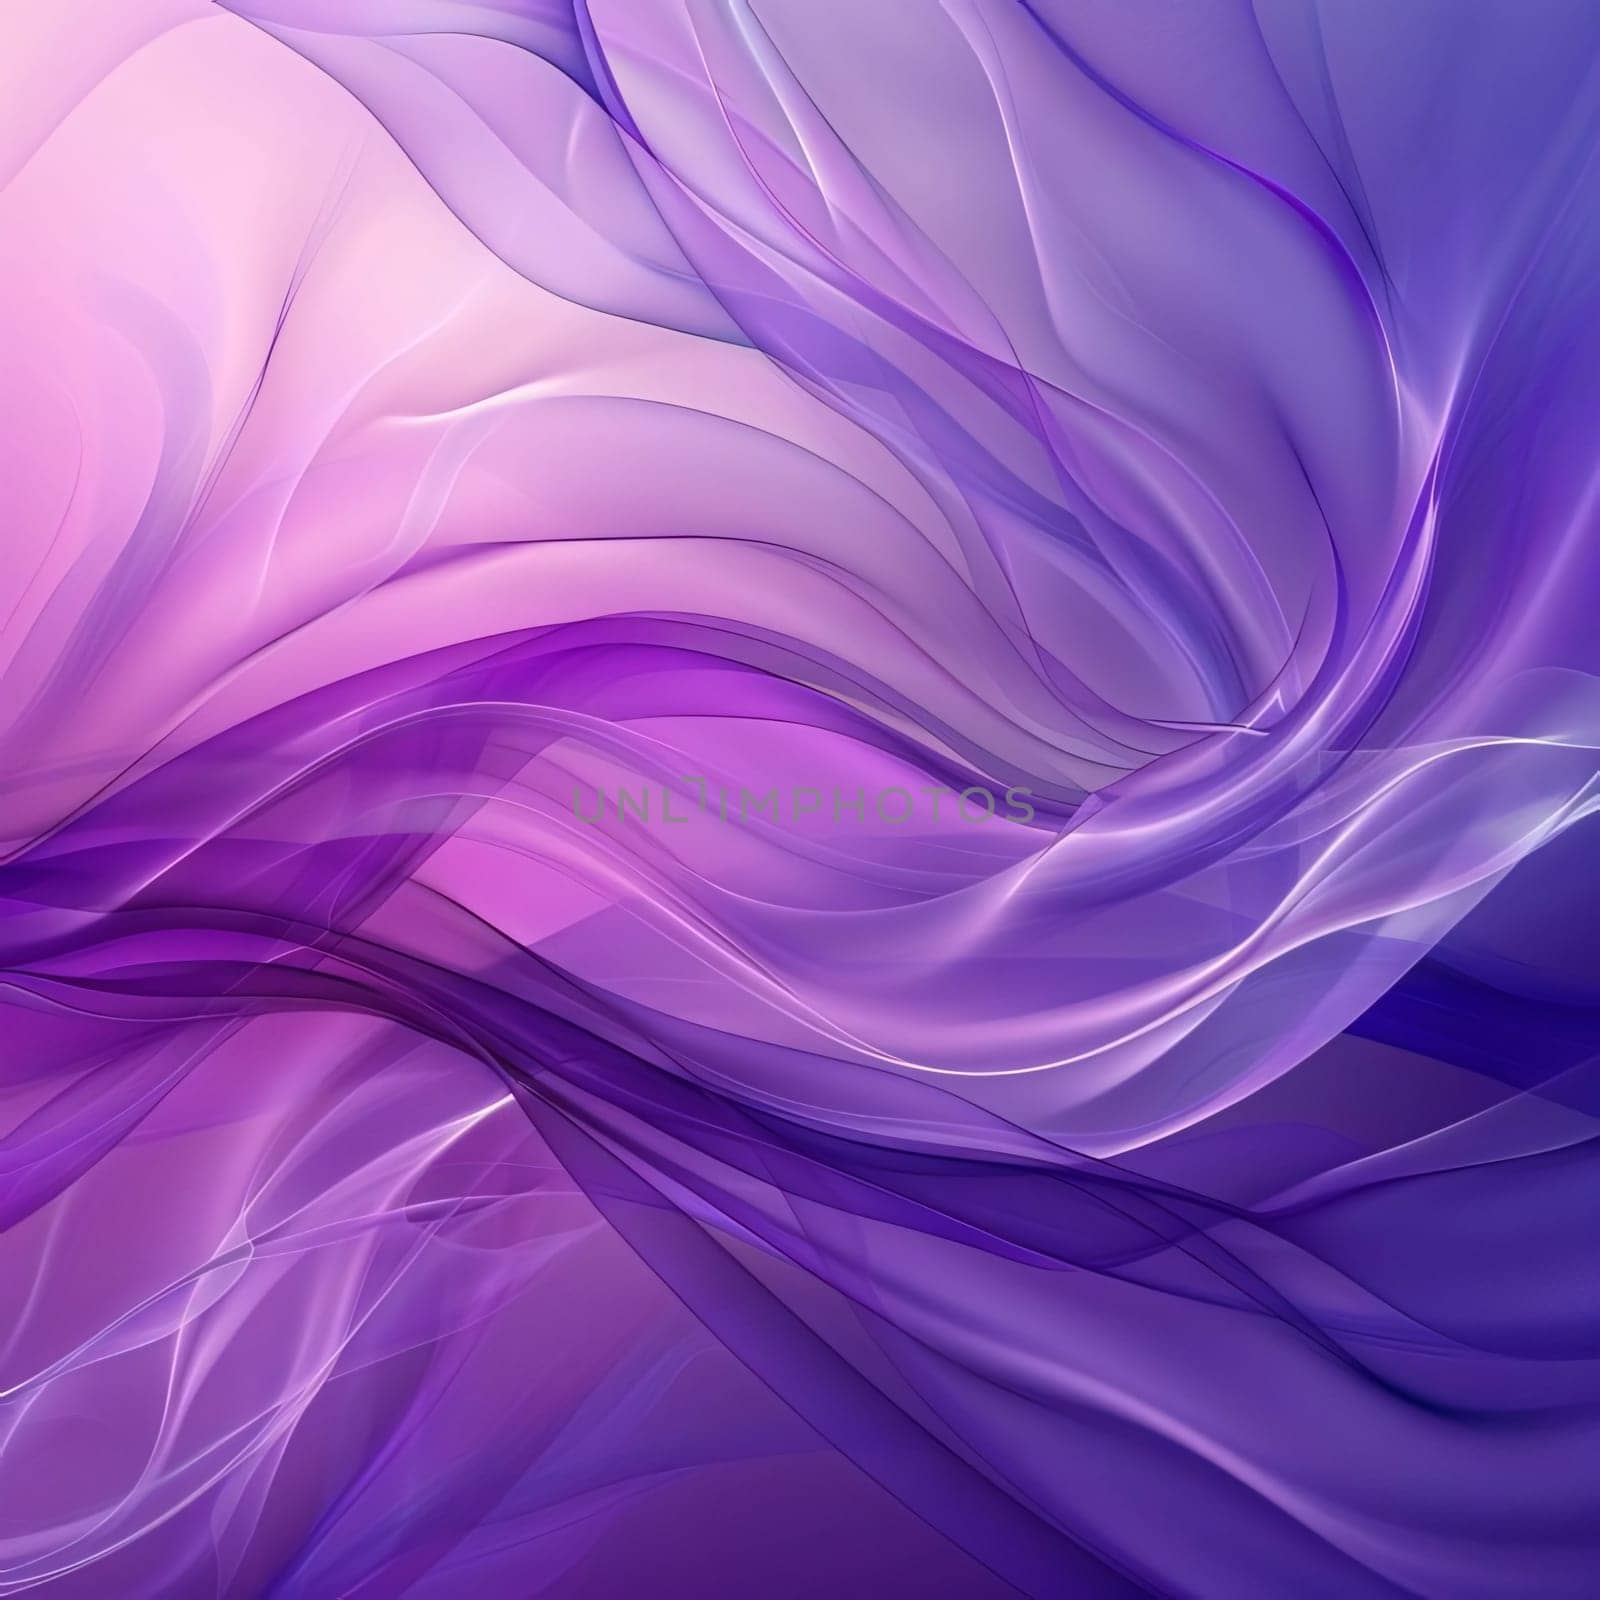 Abstract background design: abstract background with smooth lines in purple and violet colors, digitally generated image